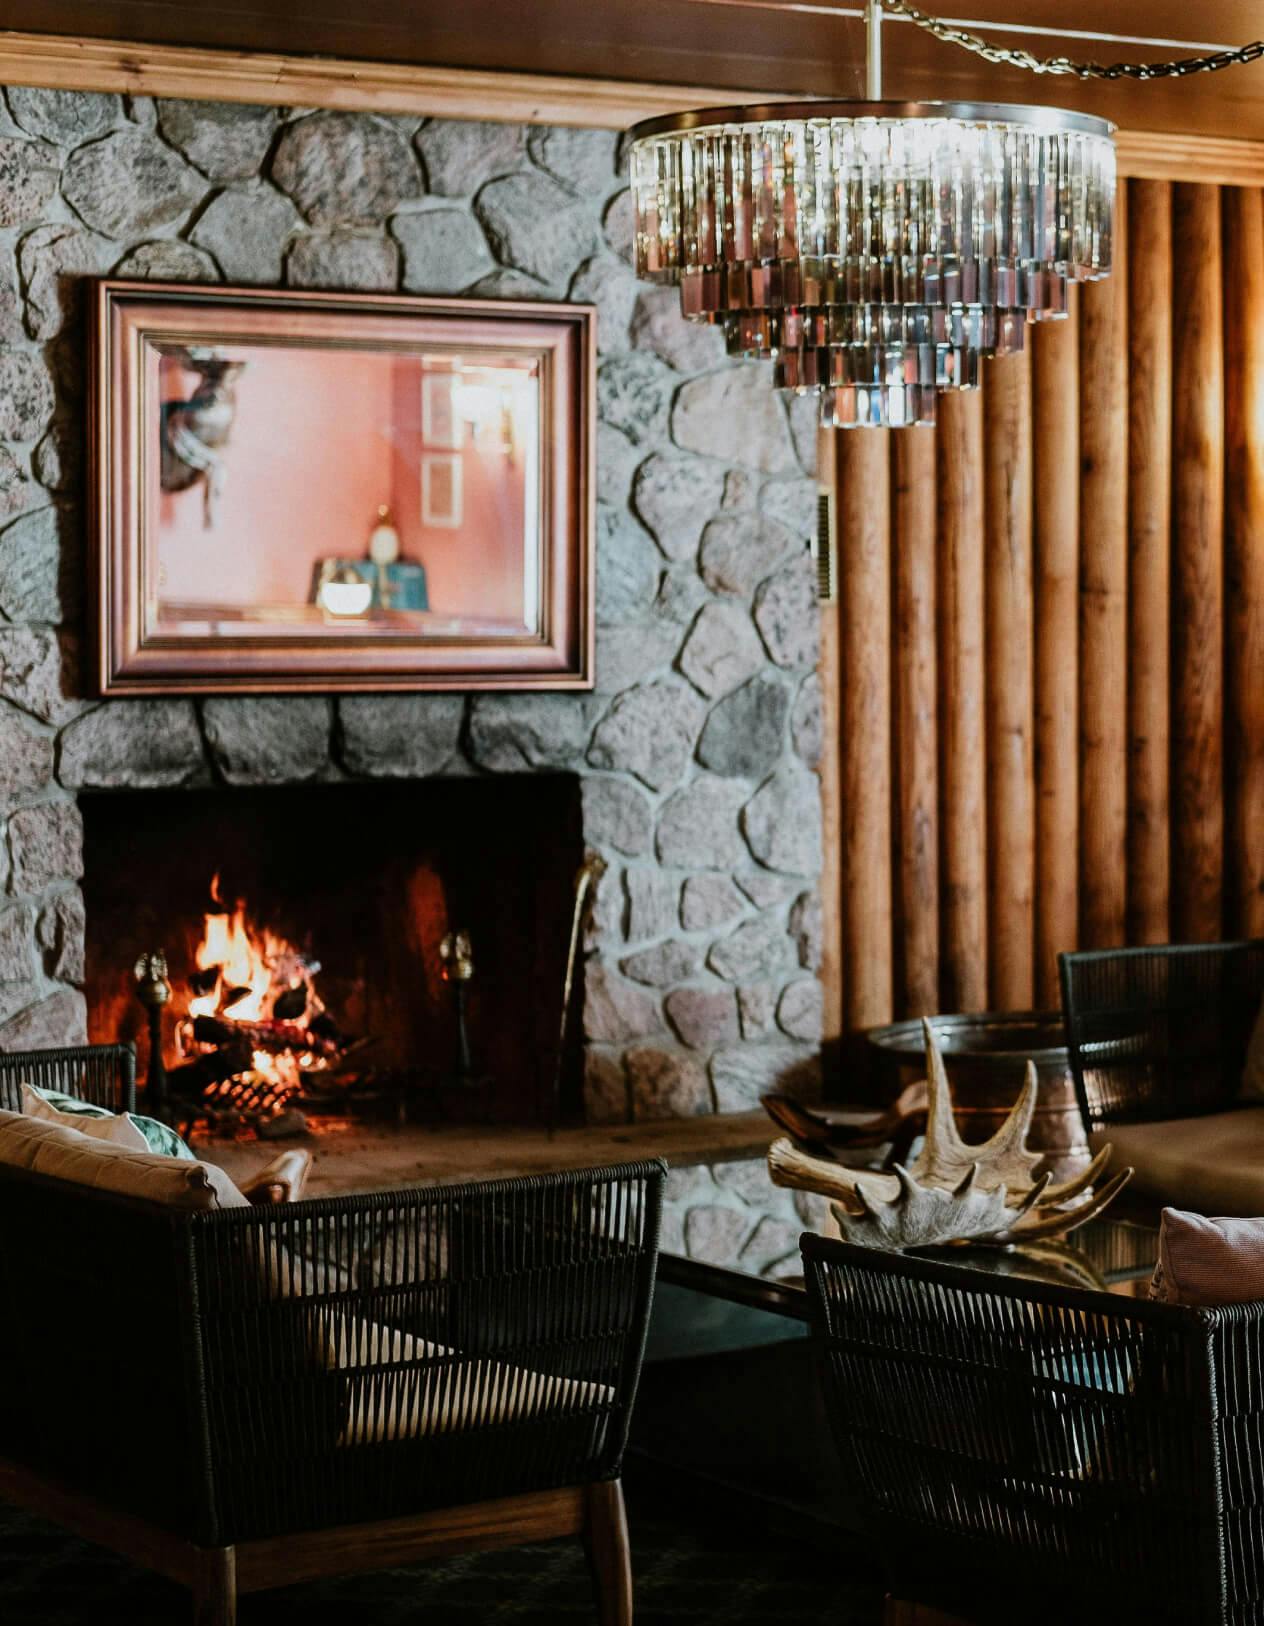 A hotel restaurant with a stone fireplace that has a fire burning within it. There is a mirror above the fireplace reflecting a red wall. Hanging from the ceiling is a mirrored chandelier. In front of the fireplace is a glass coffee table with a single deer antler on top of it. There are black wicker chairs around the table.